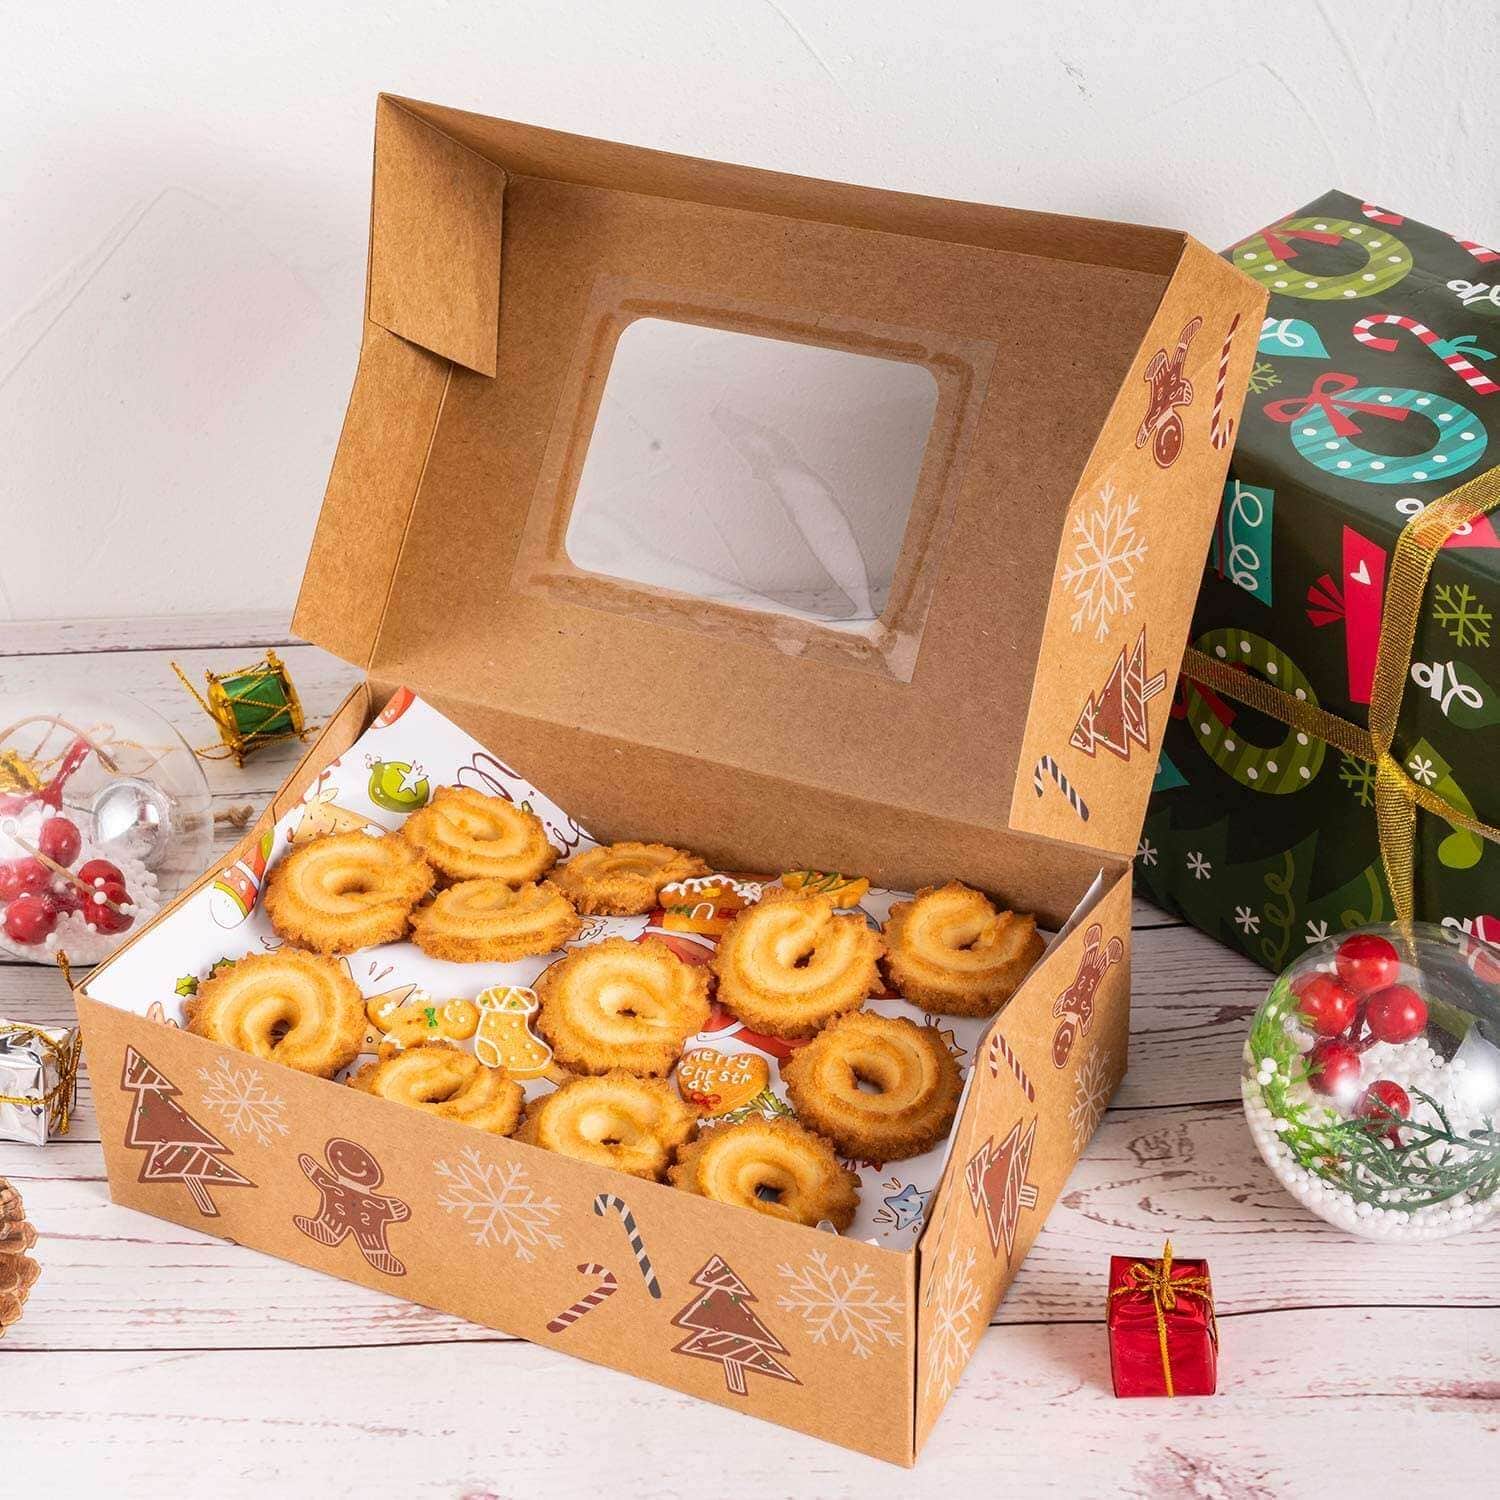 Sunolga Christmas Cookie Boxes 12 pcs Kraft With Window Christmas Treats Boxes For Gifting Bakery Candy Dessert Boxes With Christmas Stickers For Holiday Christmas Food Containers For Gift Giving